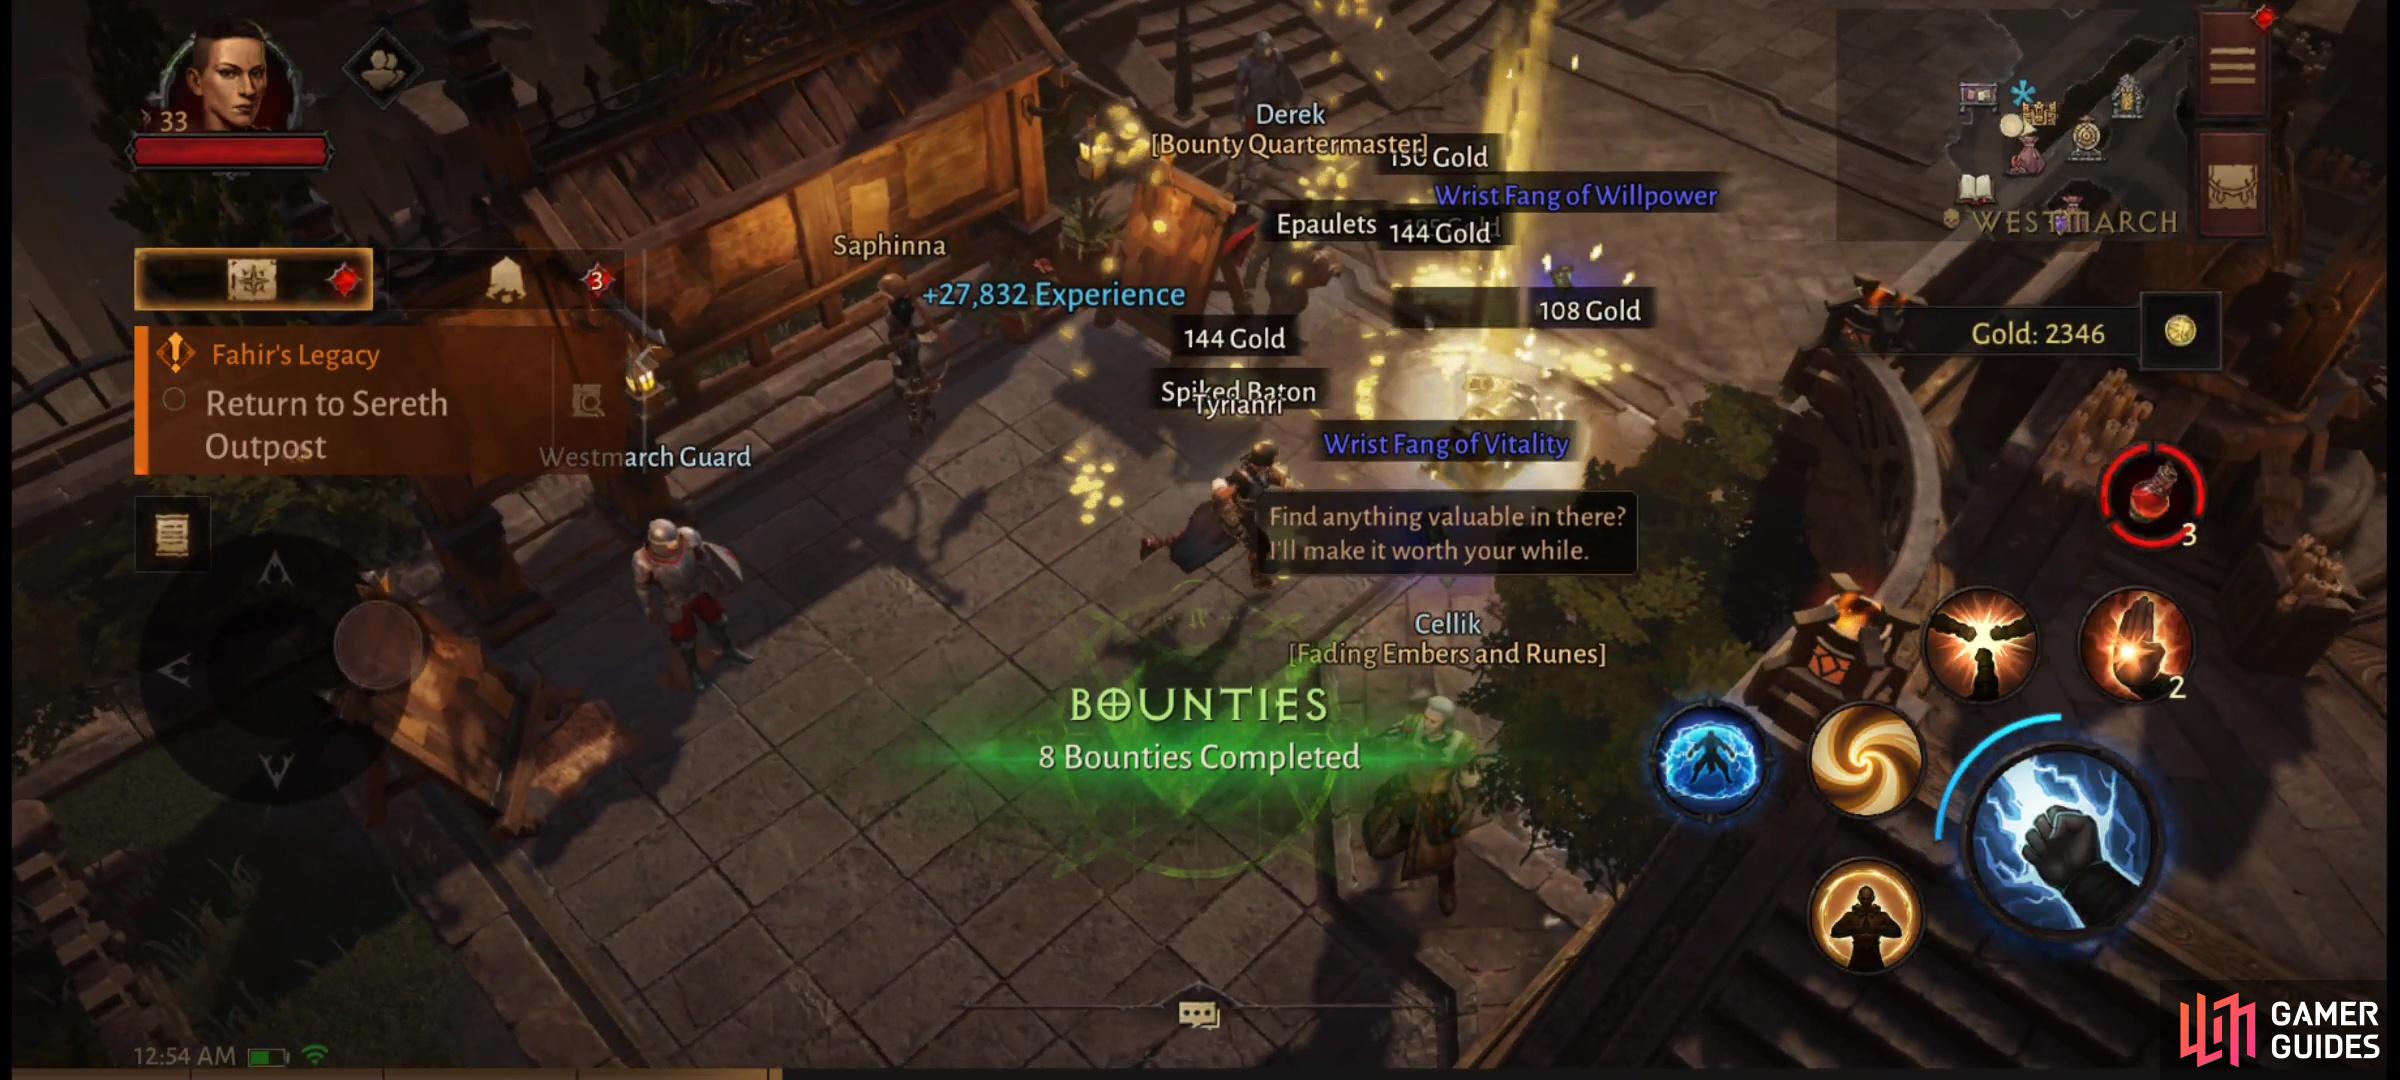 Completing Bounties will earn you more XP and loot than running around aimlessly picking on random monsters, an essential consideration during high levels, when progression is slower.